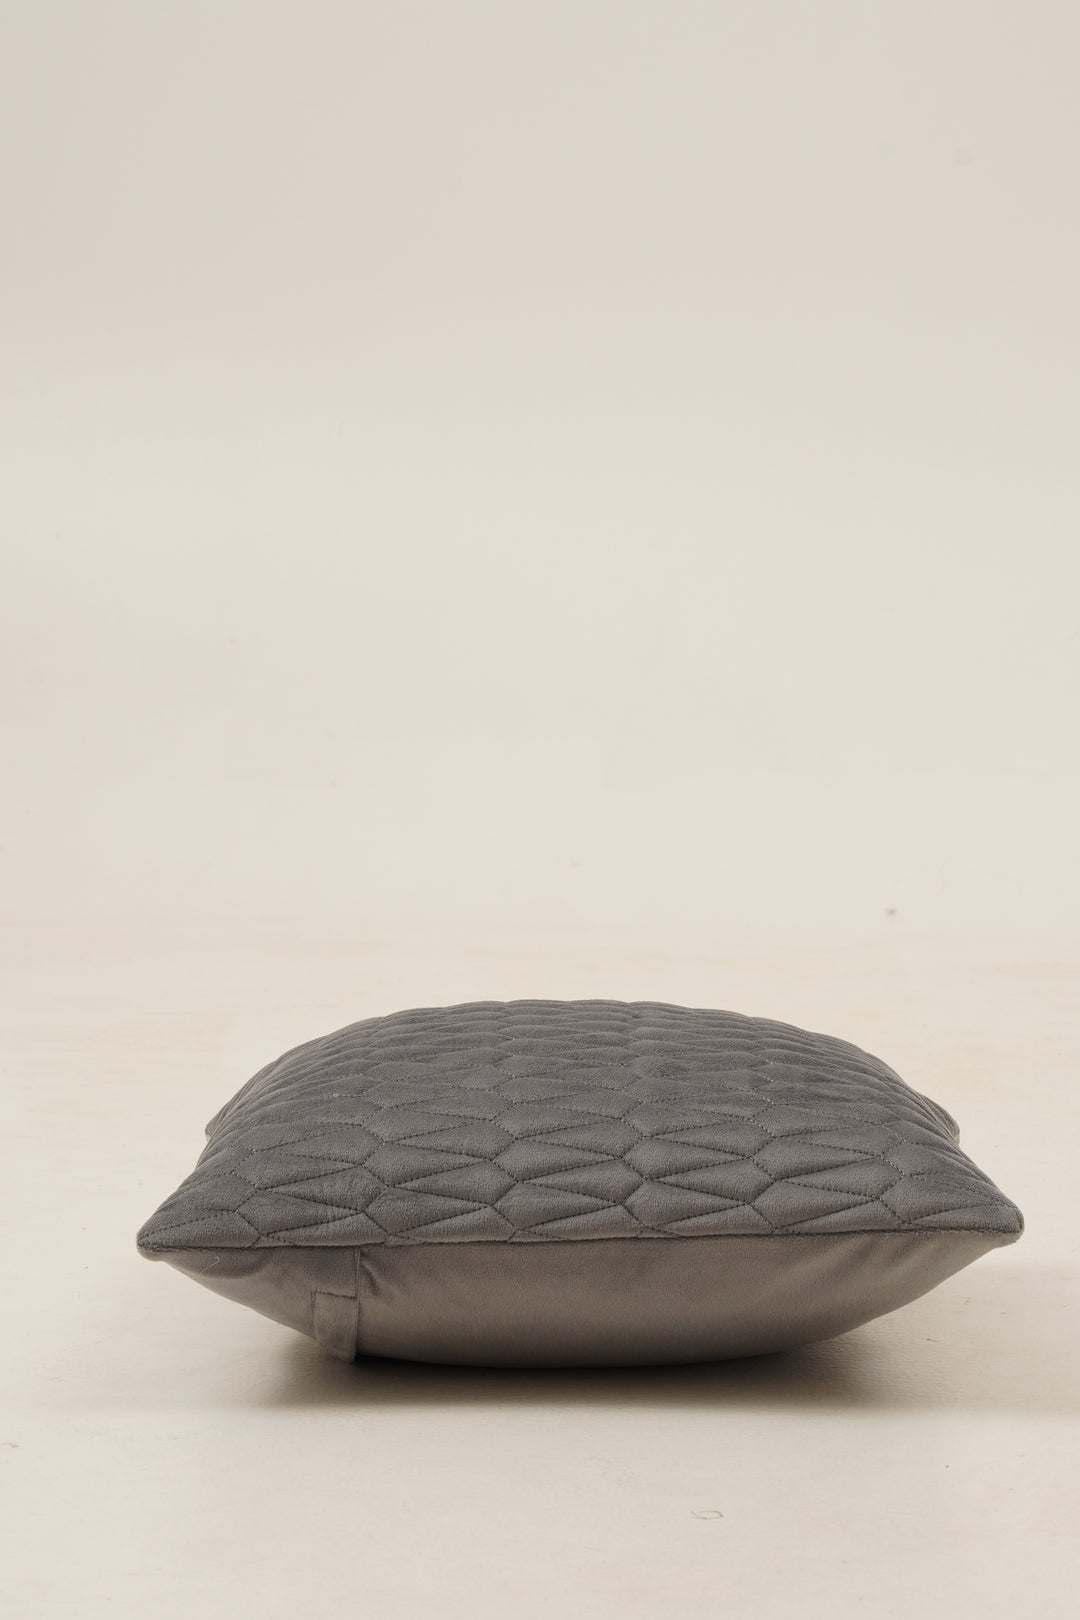 Sapphire Cushion Cover 16 x 16. Set of 2 (Grey)